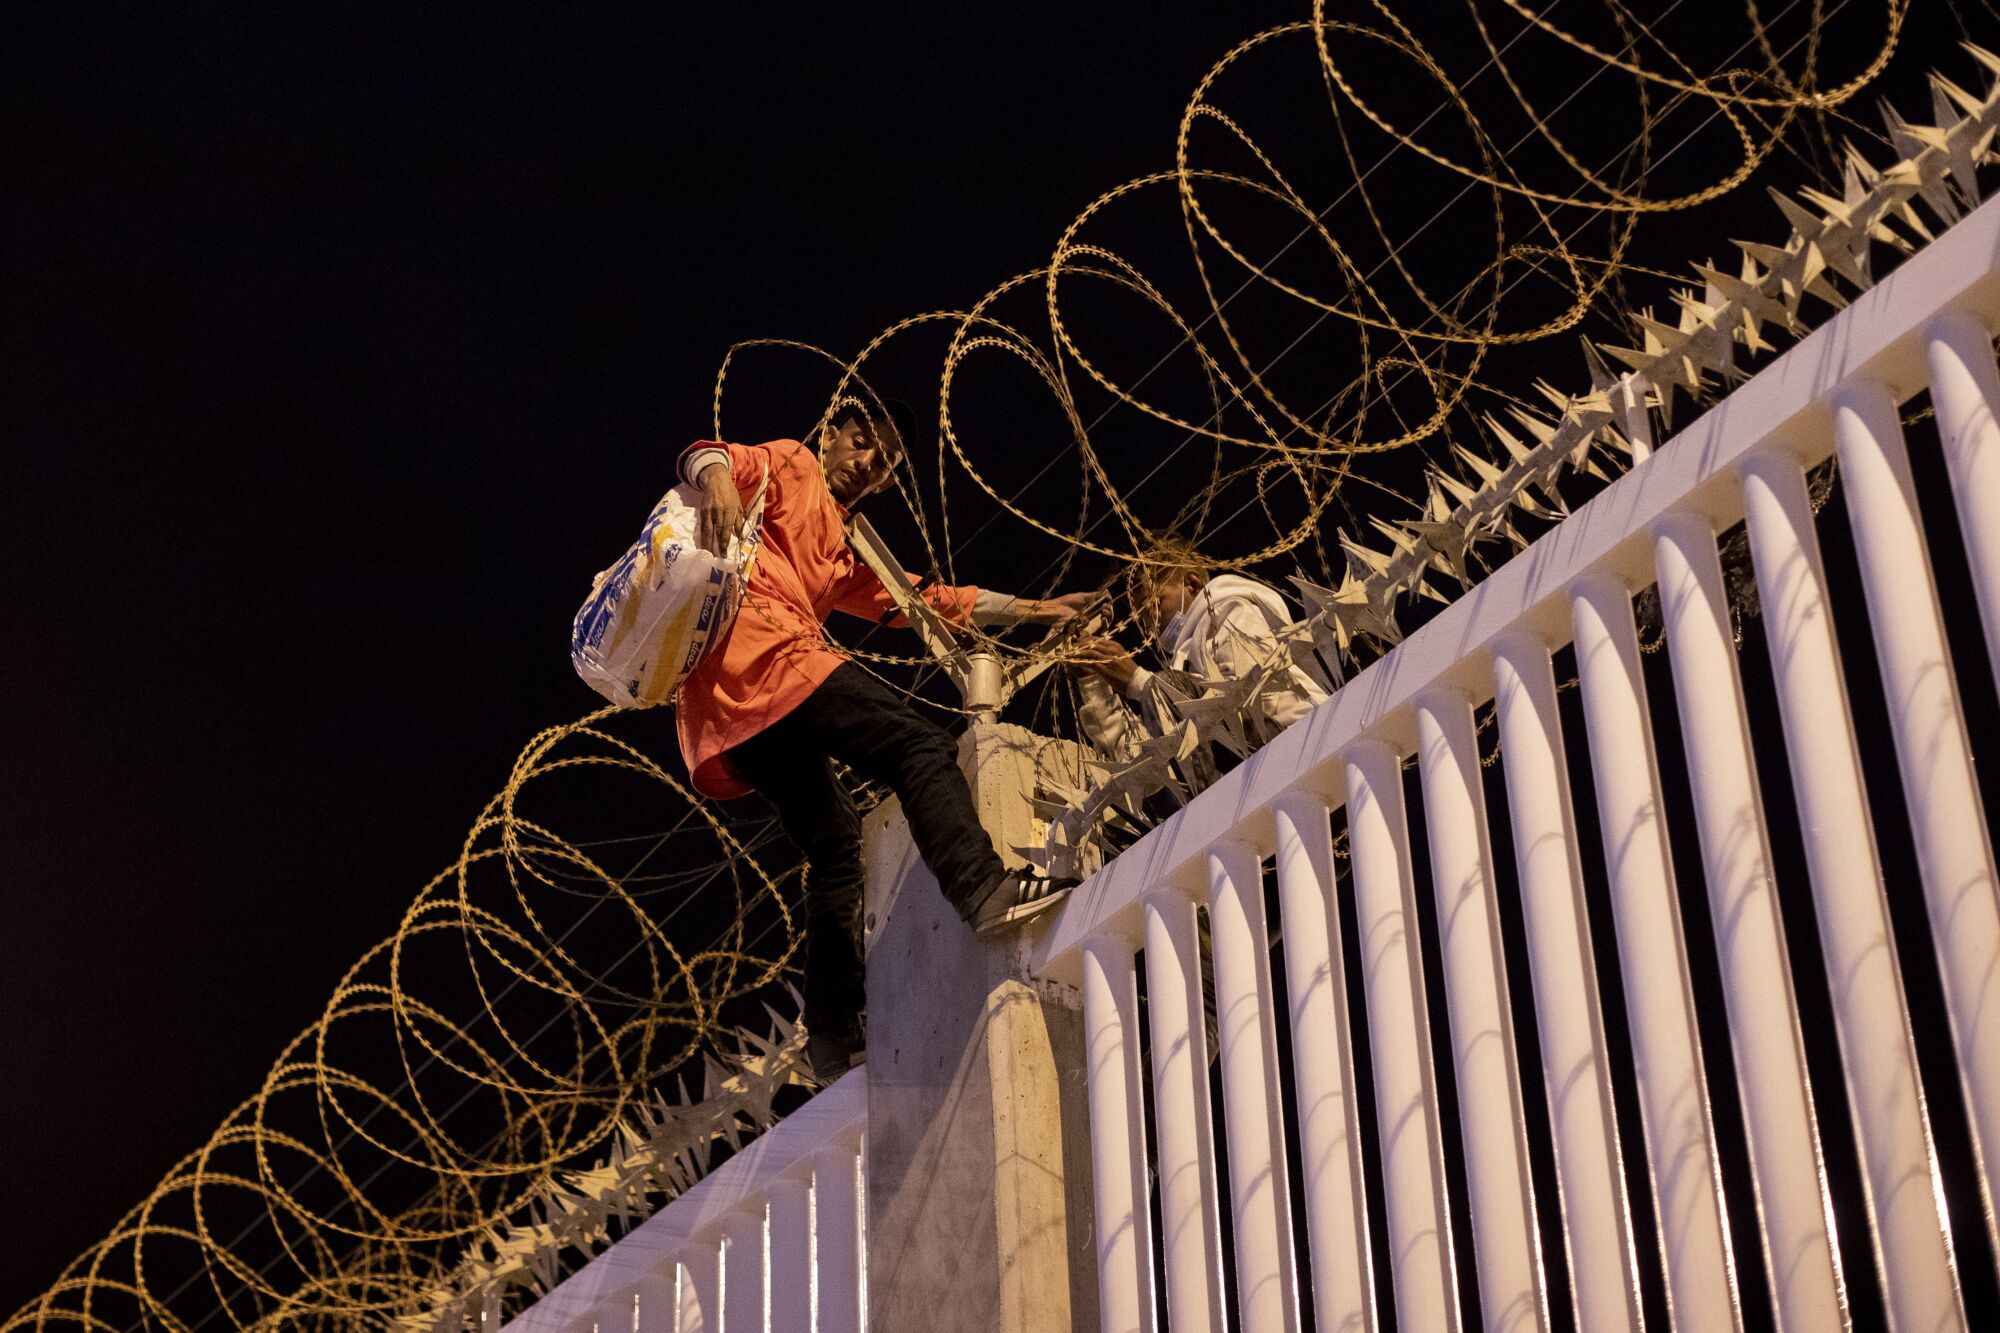 Two men climb over a razor-wire-topped fence in the night